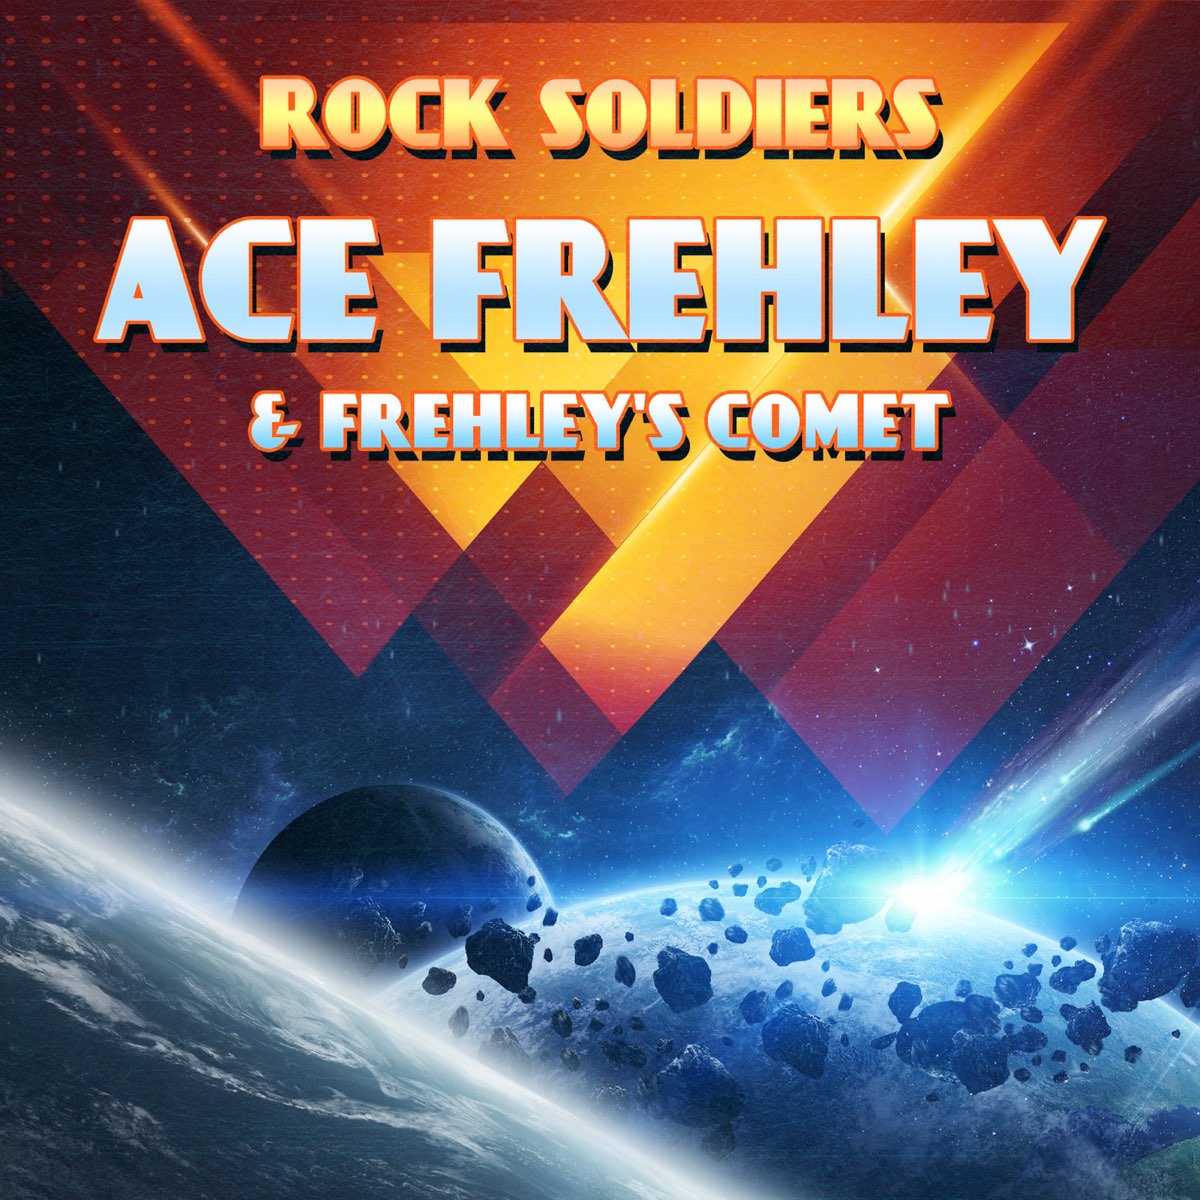 Rock Soldiers“ von Ace Frehley & Frehley's Comet bei Apple Music